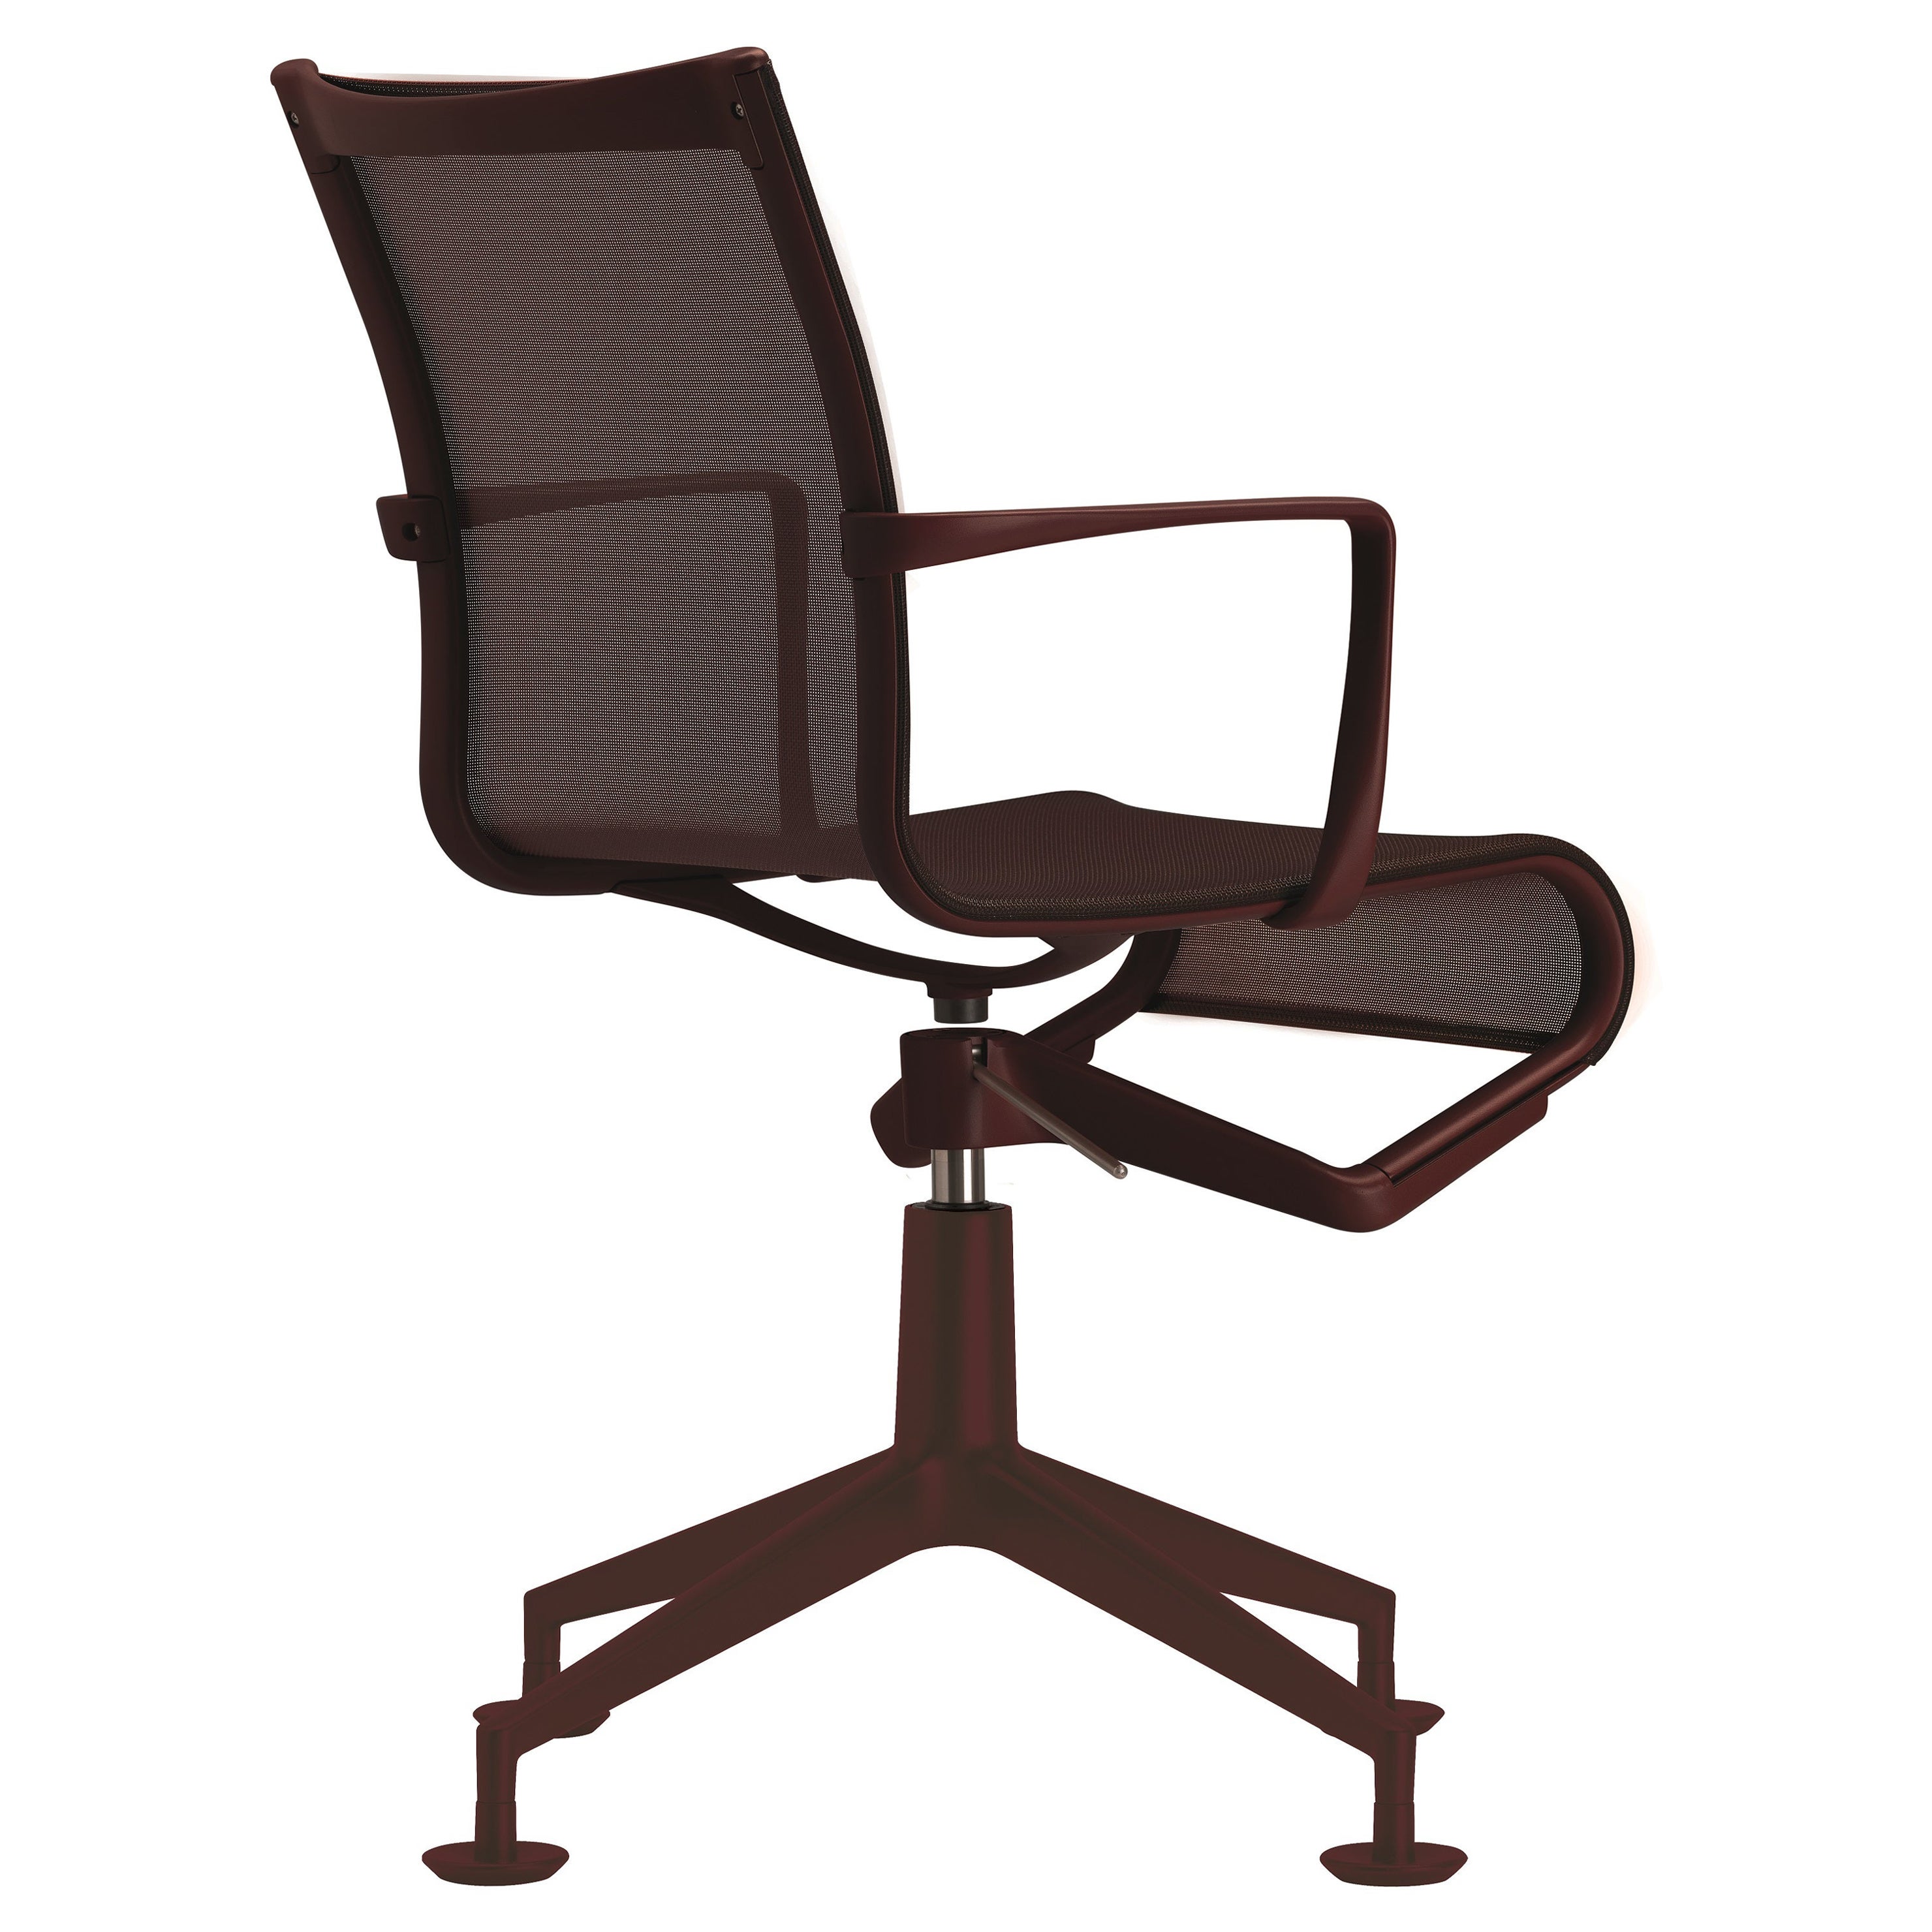 Alias 437 Meetingframe 44 Chair in Aubergine with Lacquered Aluminum Frame For Sale